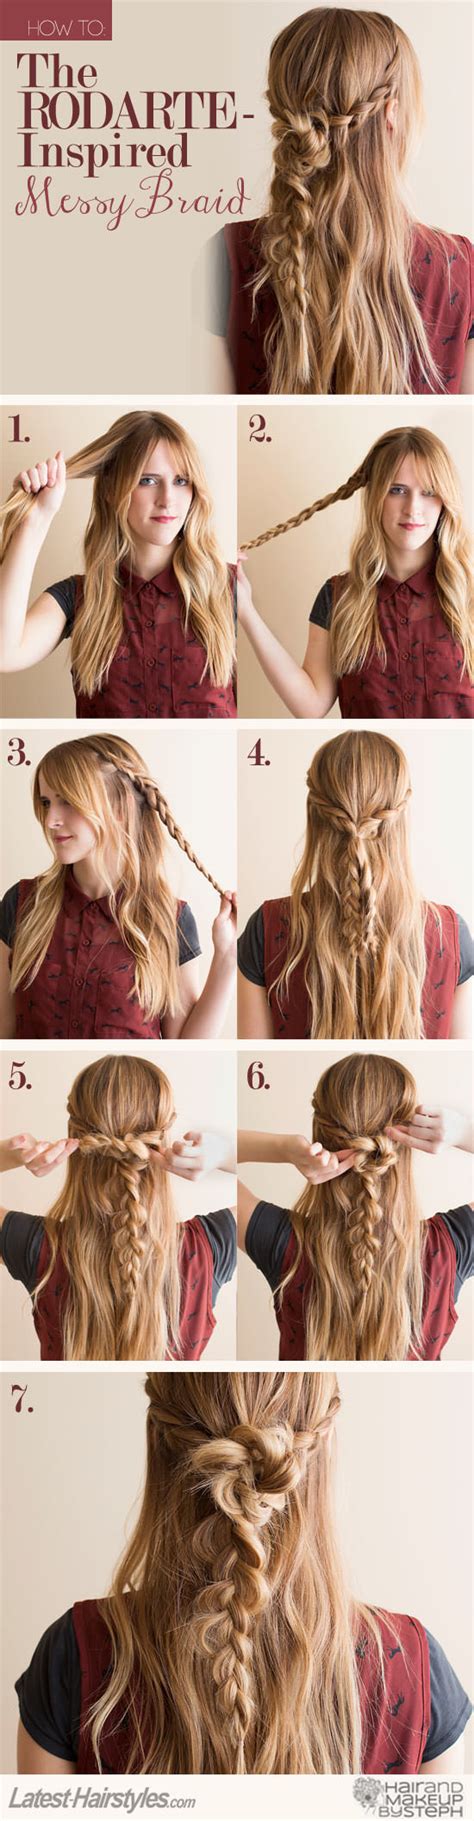 Cute braids and half up hairstyle ideas. 15 Casual & Simple Hairstyles that are Half Up, Half Down